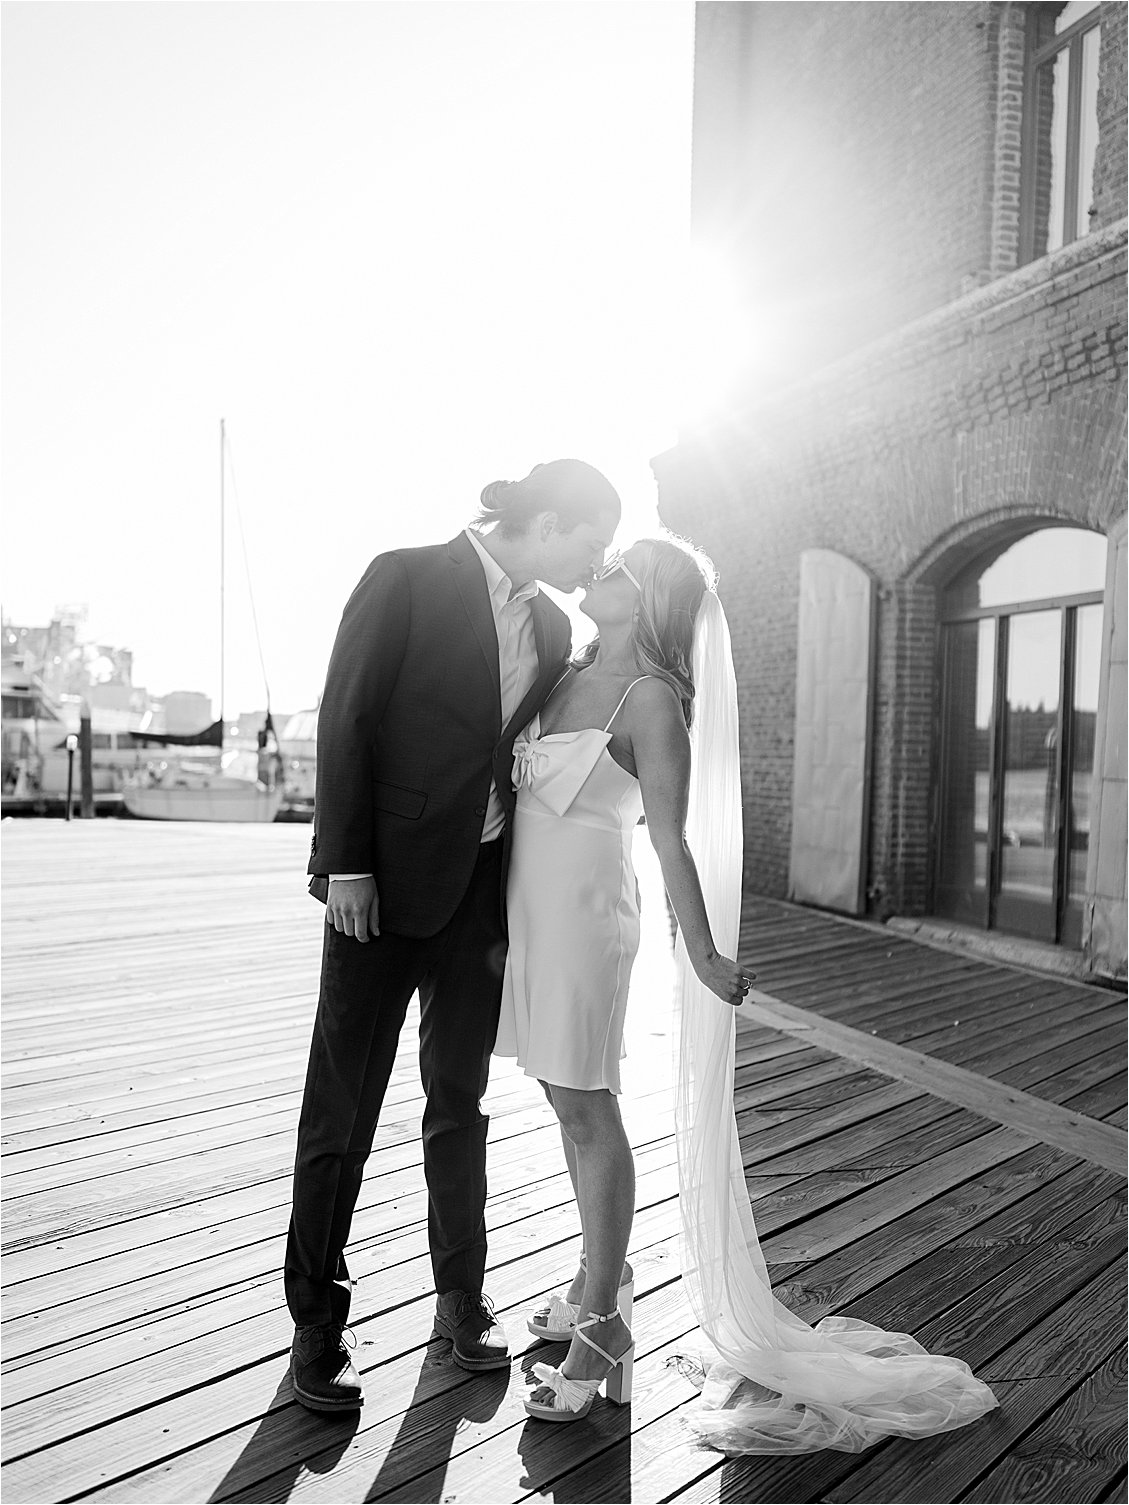 Modern engagement session in Fells Point with film wedding photographer, Renee Hollingshead